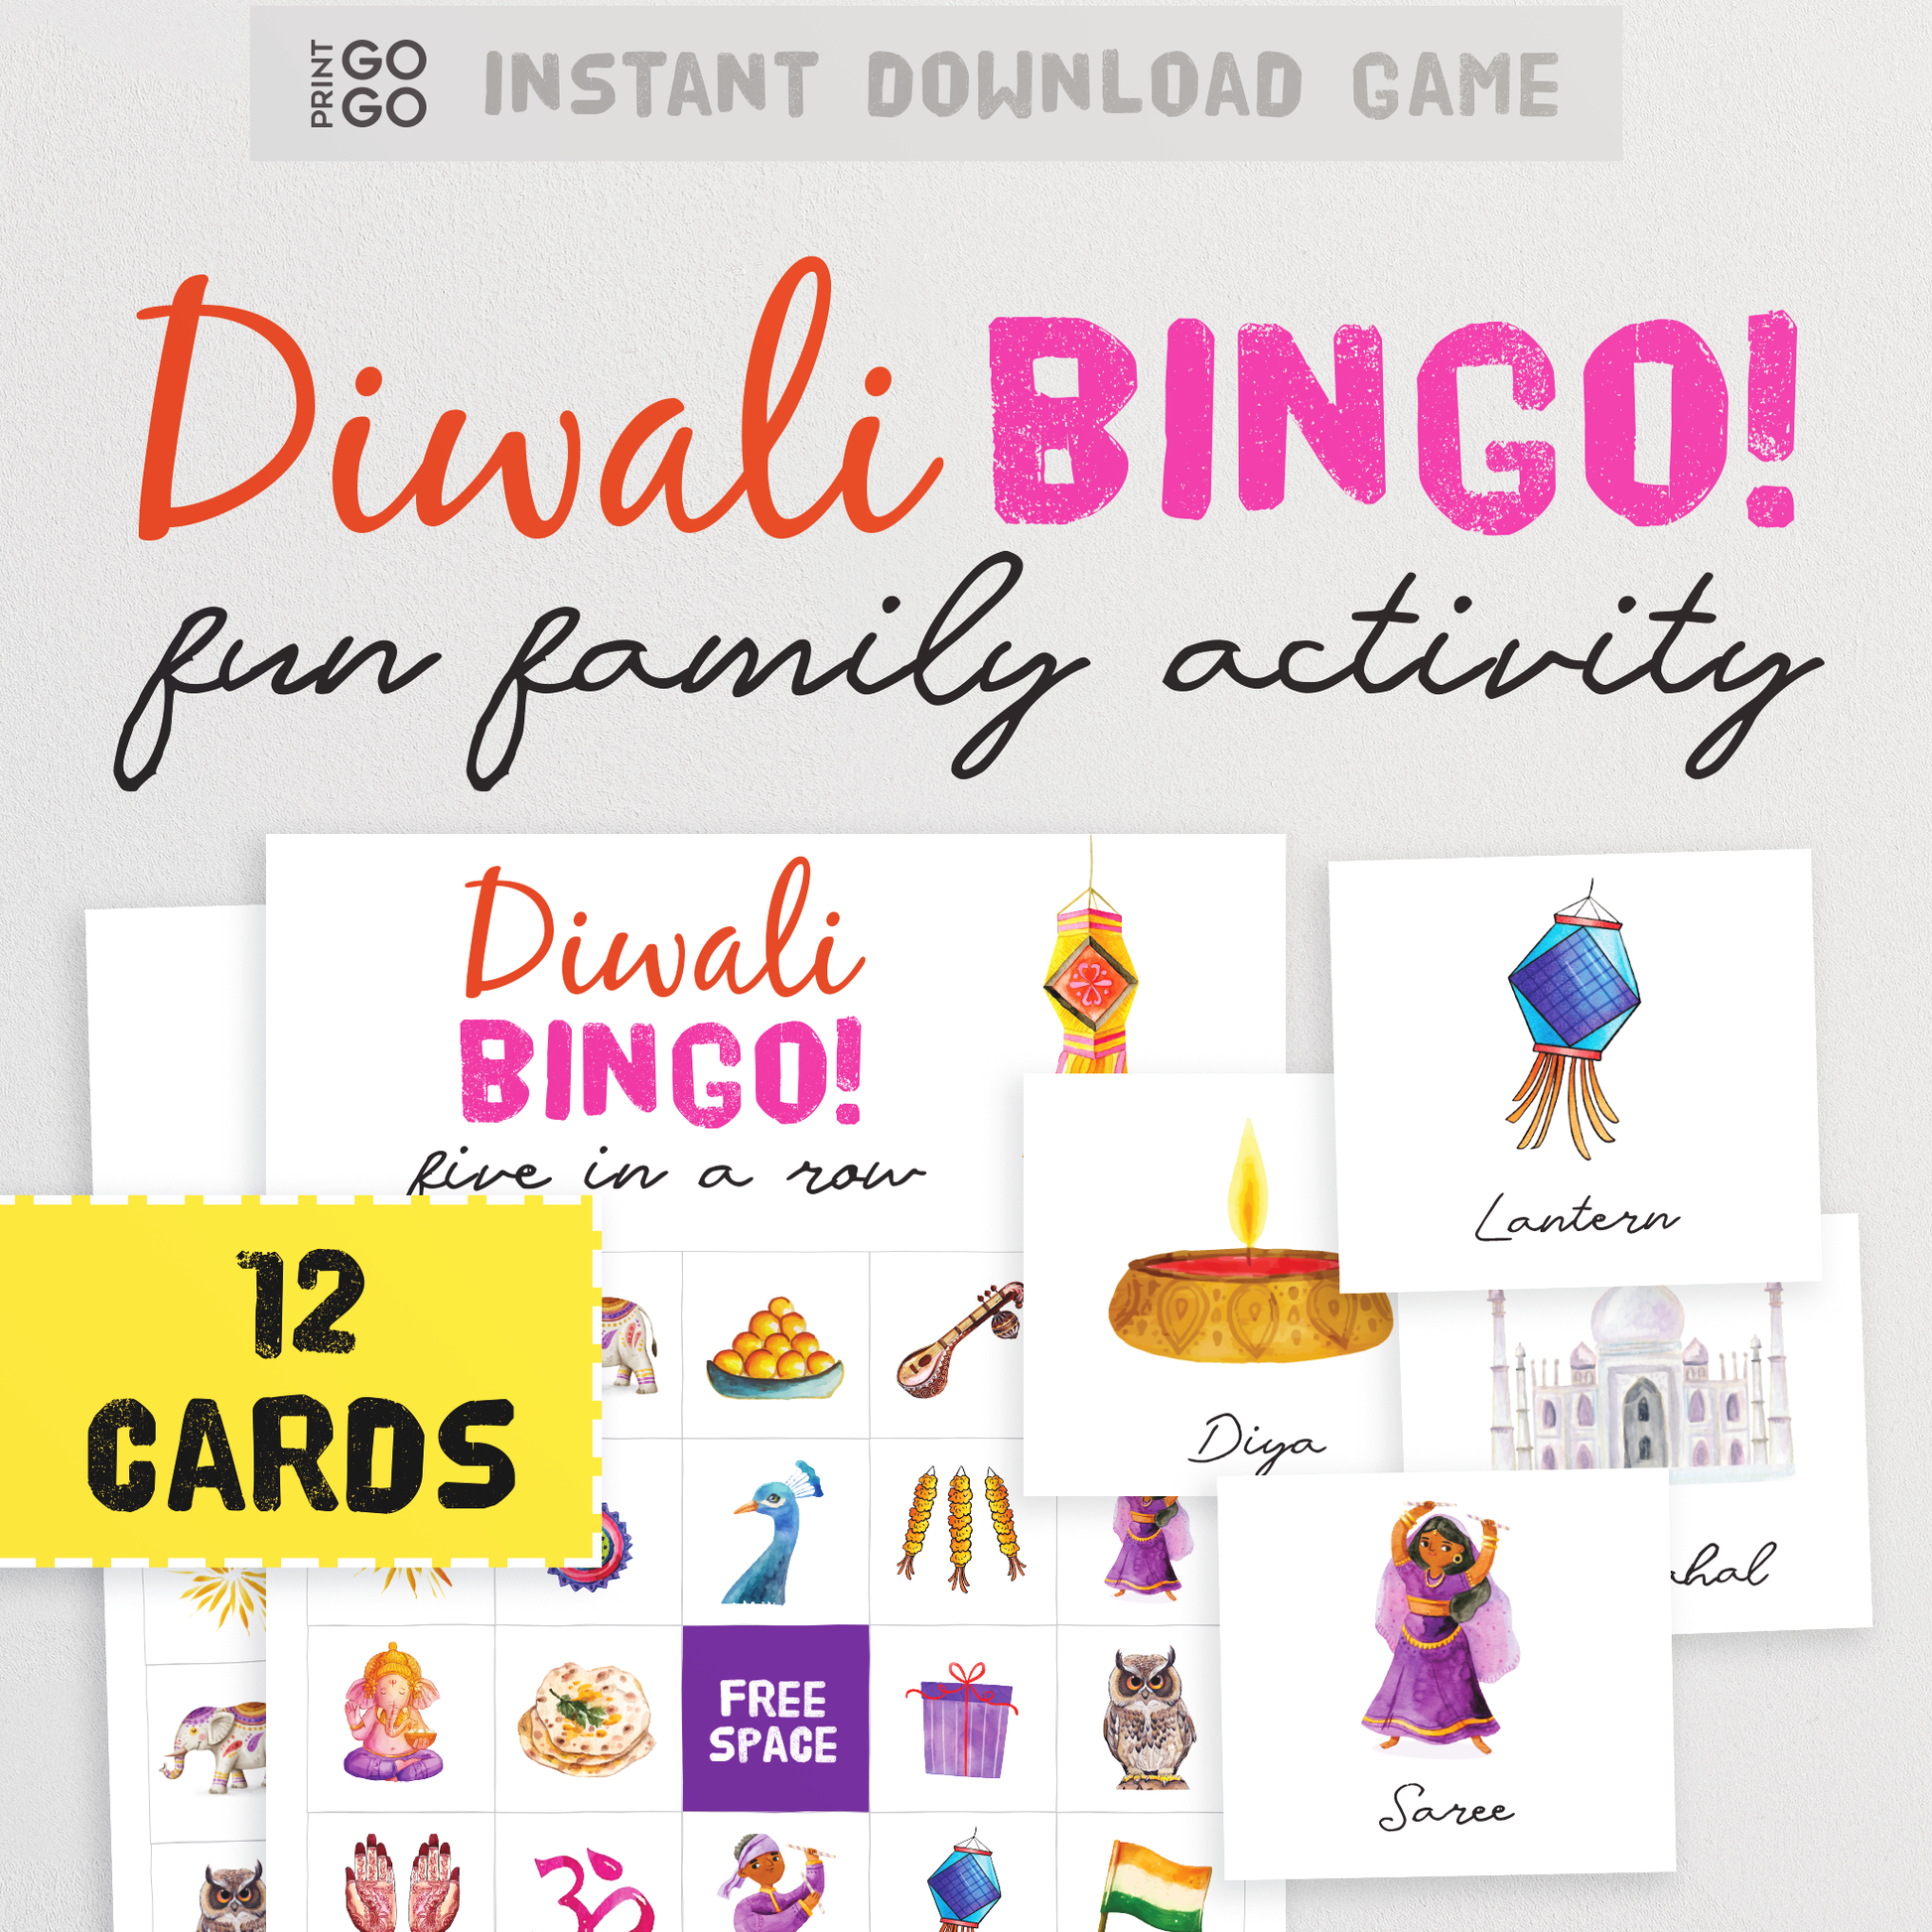 Diwali Bingo Cards - The Fun Festival of Light Party Game of Getting Five in a Row | Printable Family Activities | Group Game for Kids